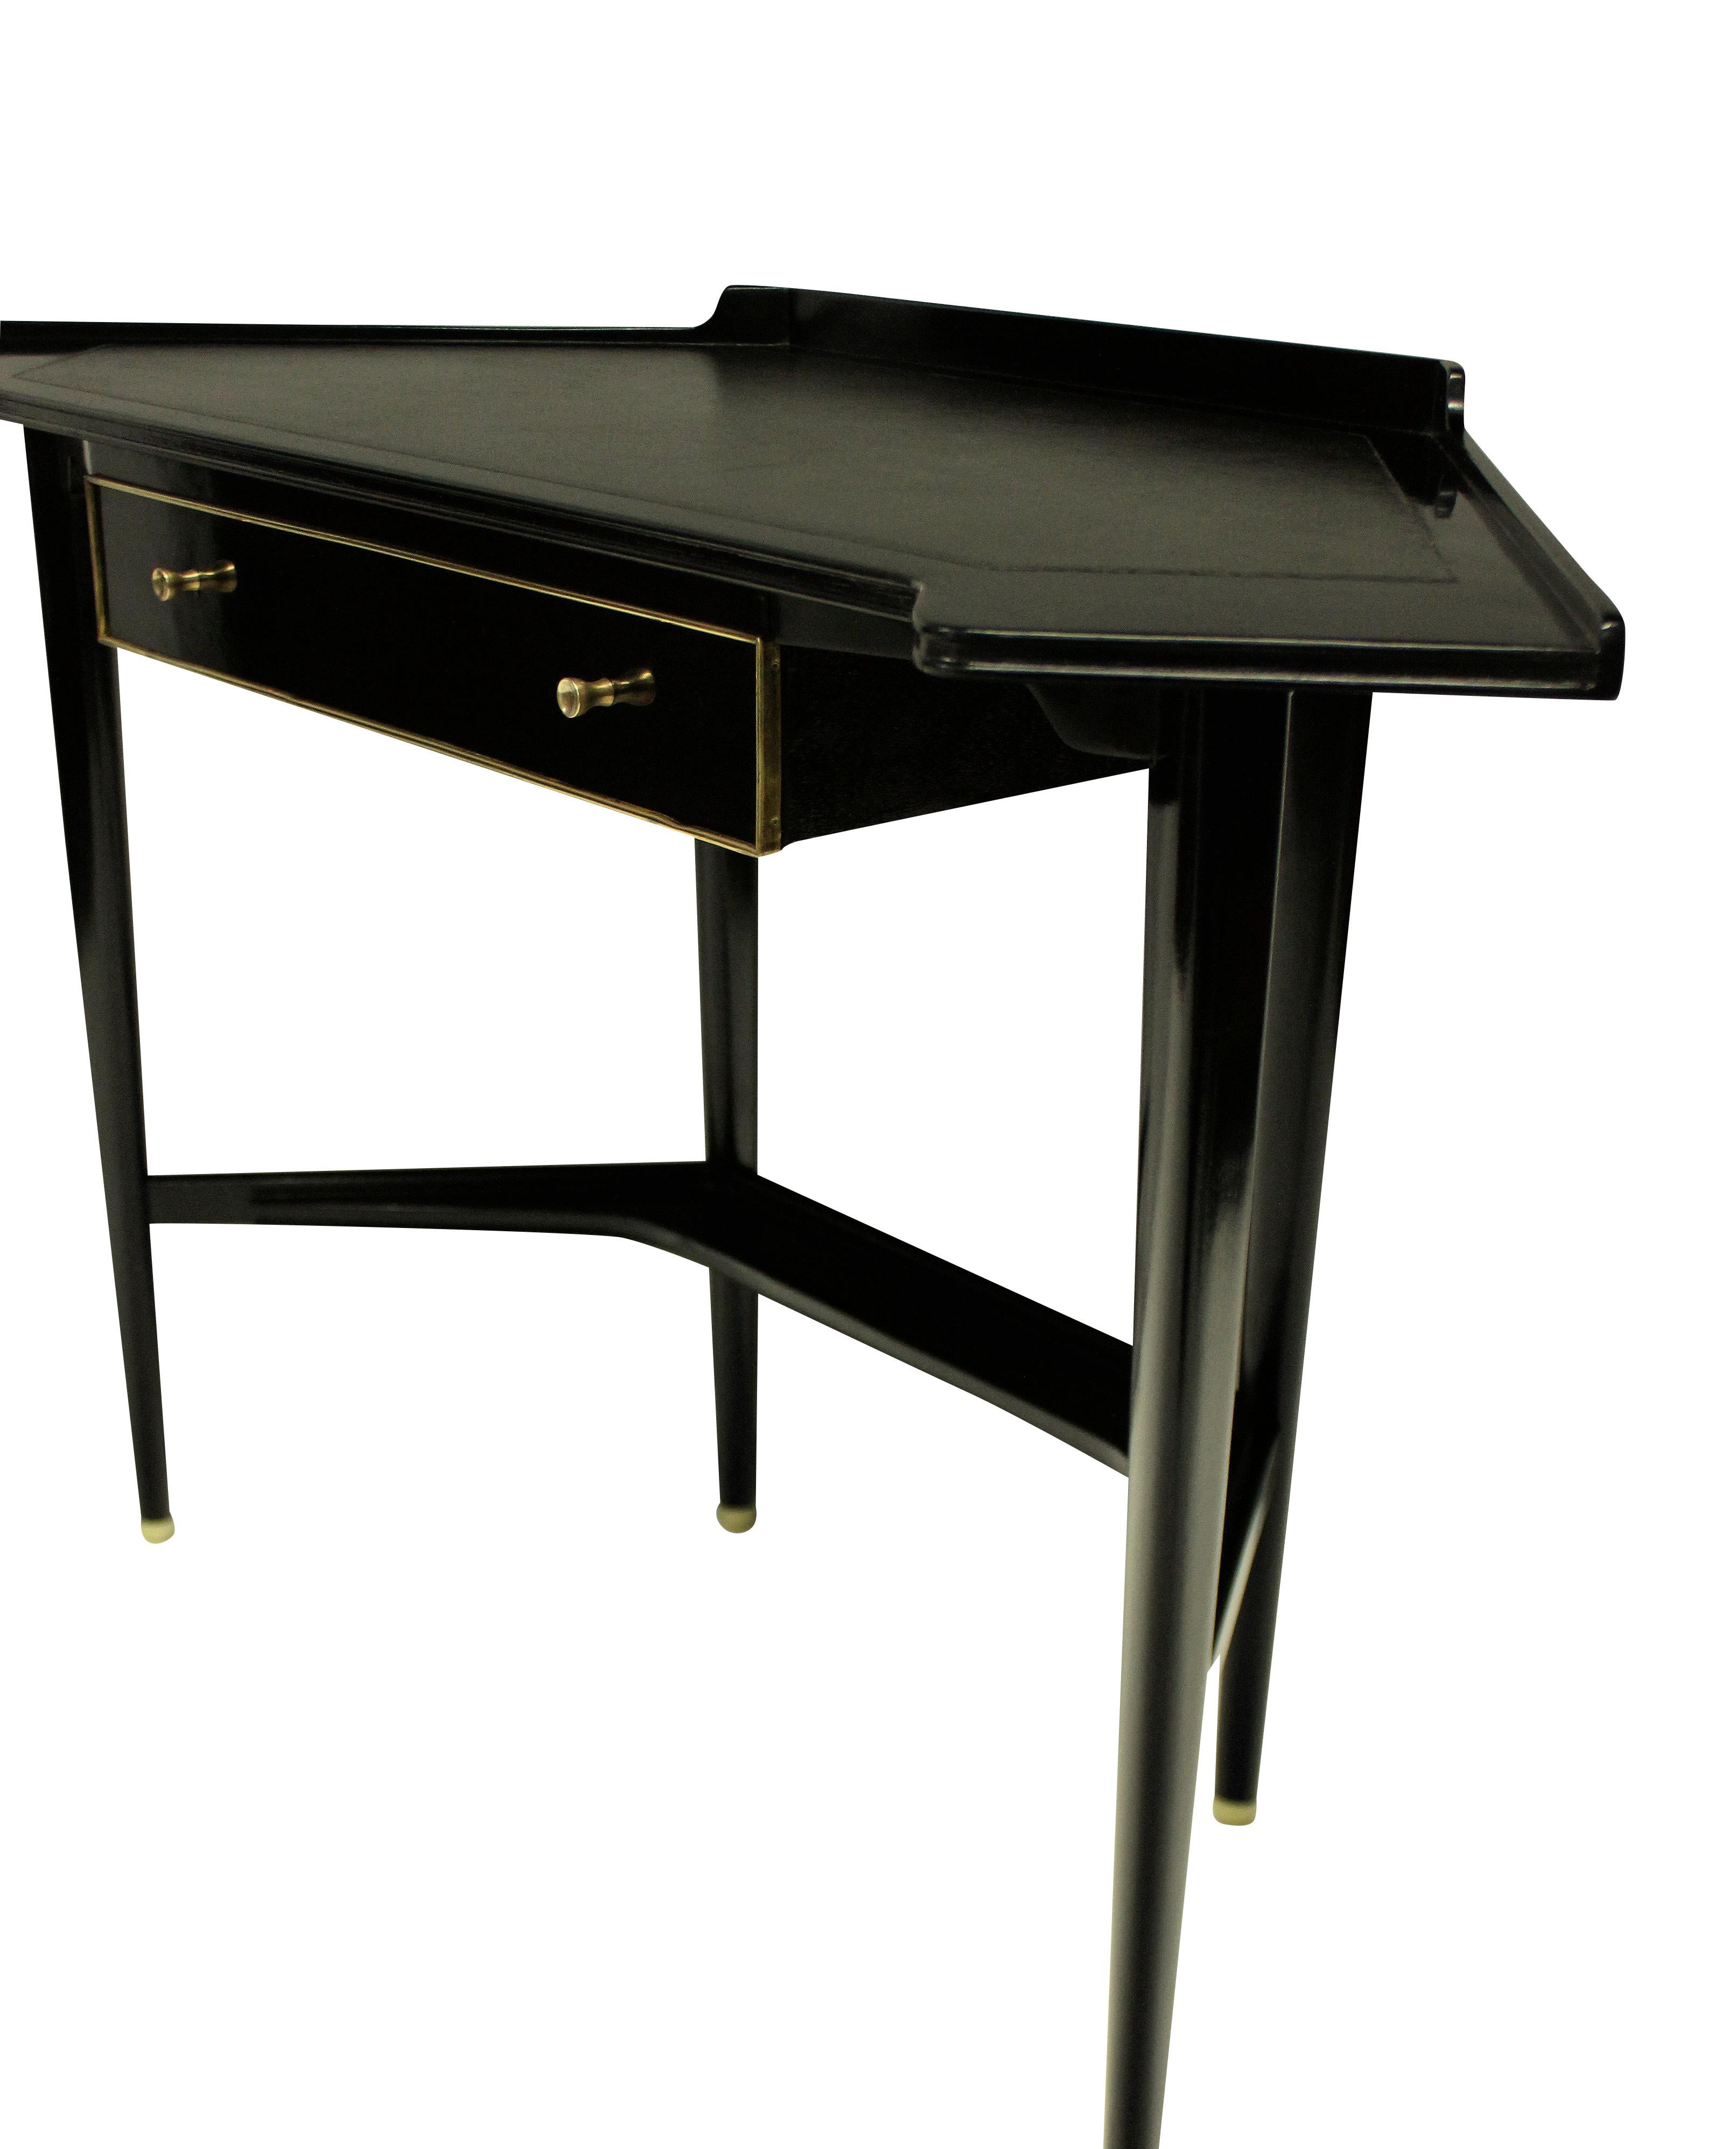 A French mid-century corner desk, ebonized, with brass detailing and a charcoal grey leather top.